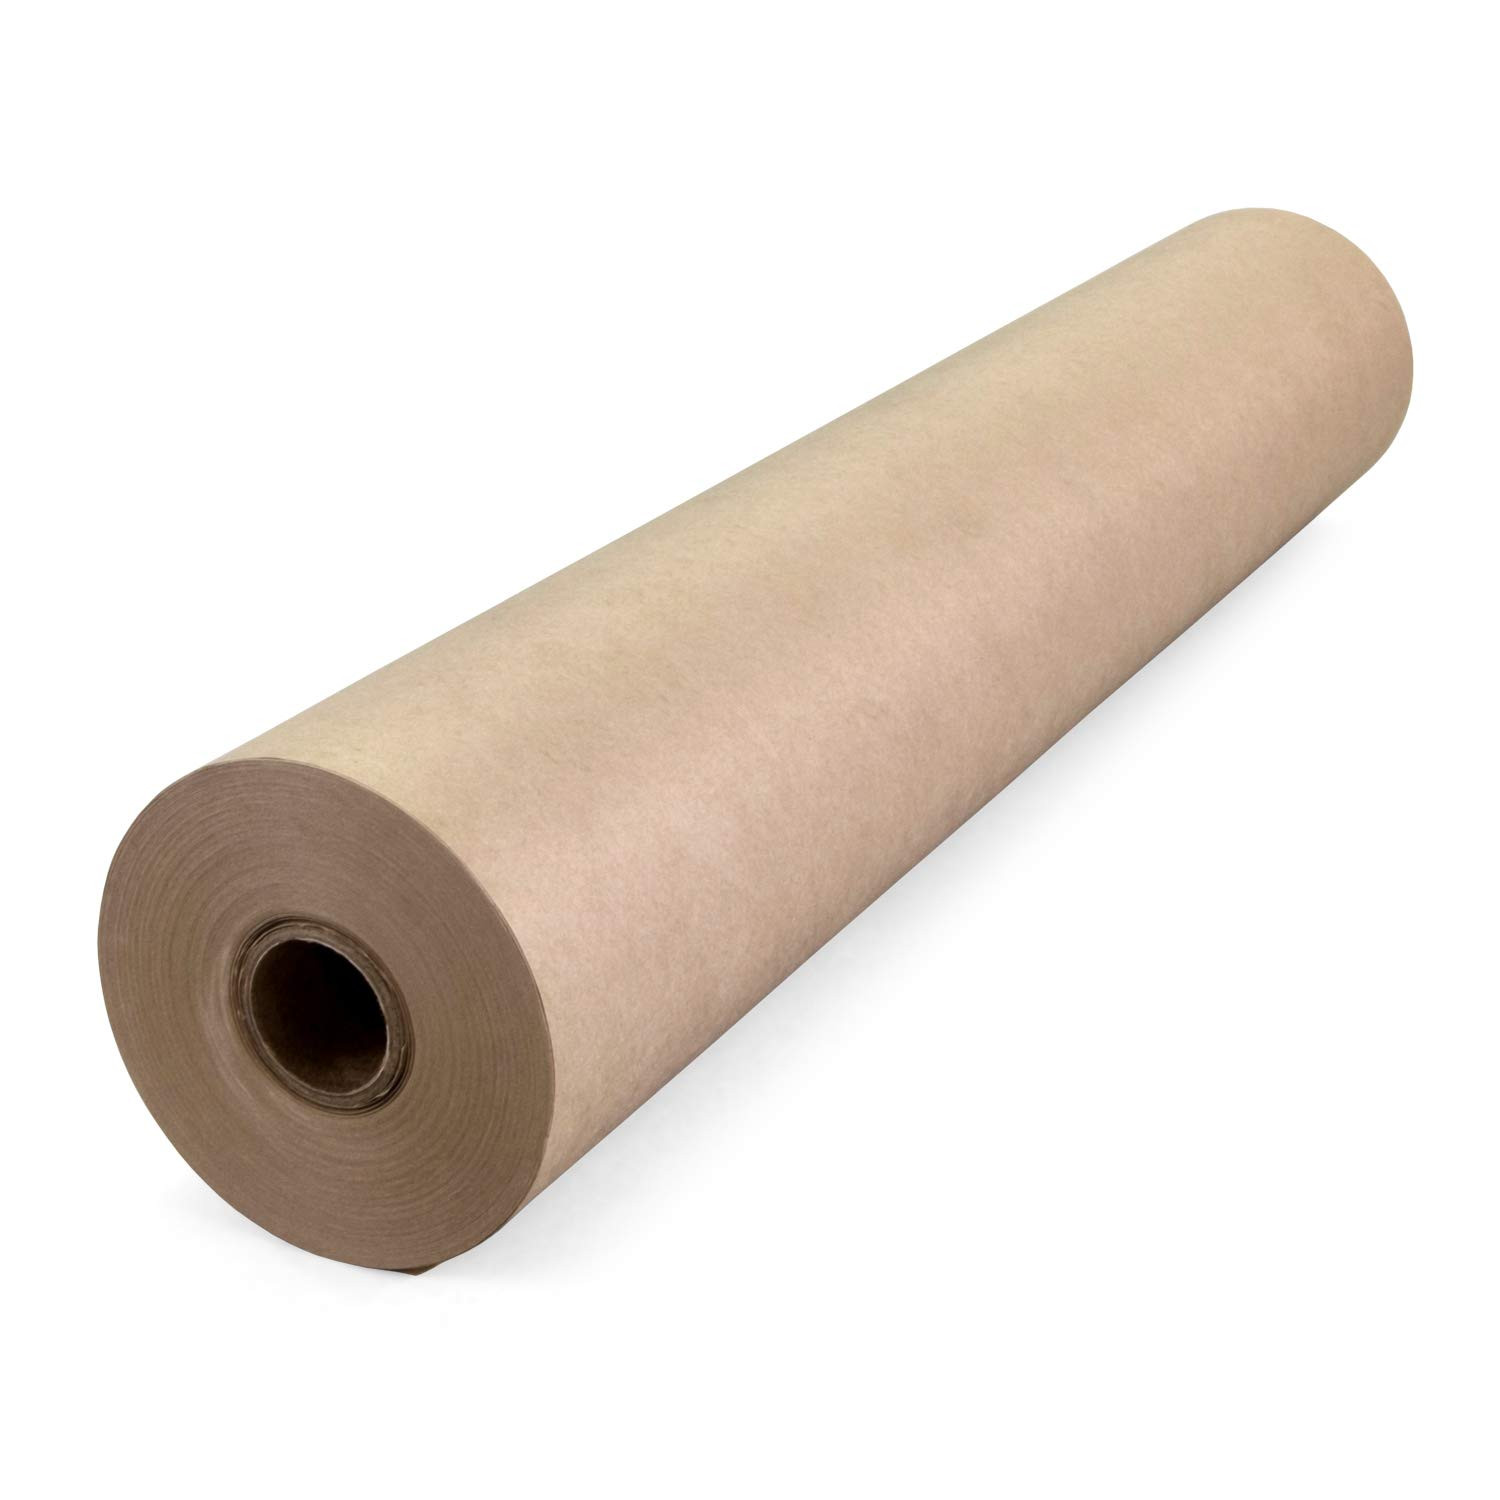 Brown Craft Paper Roll 2400 x 48”